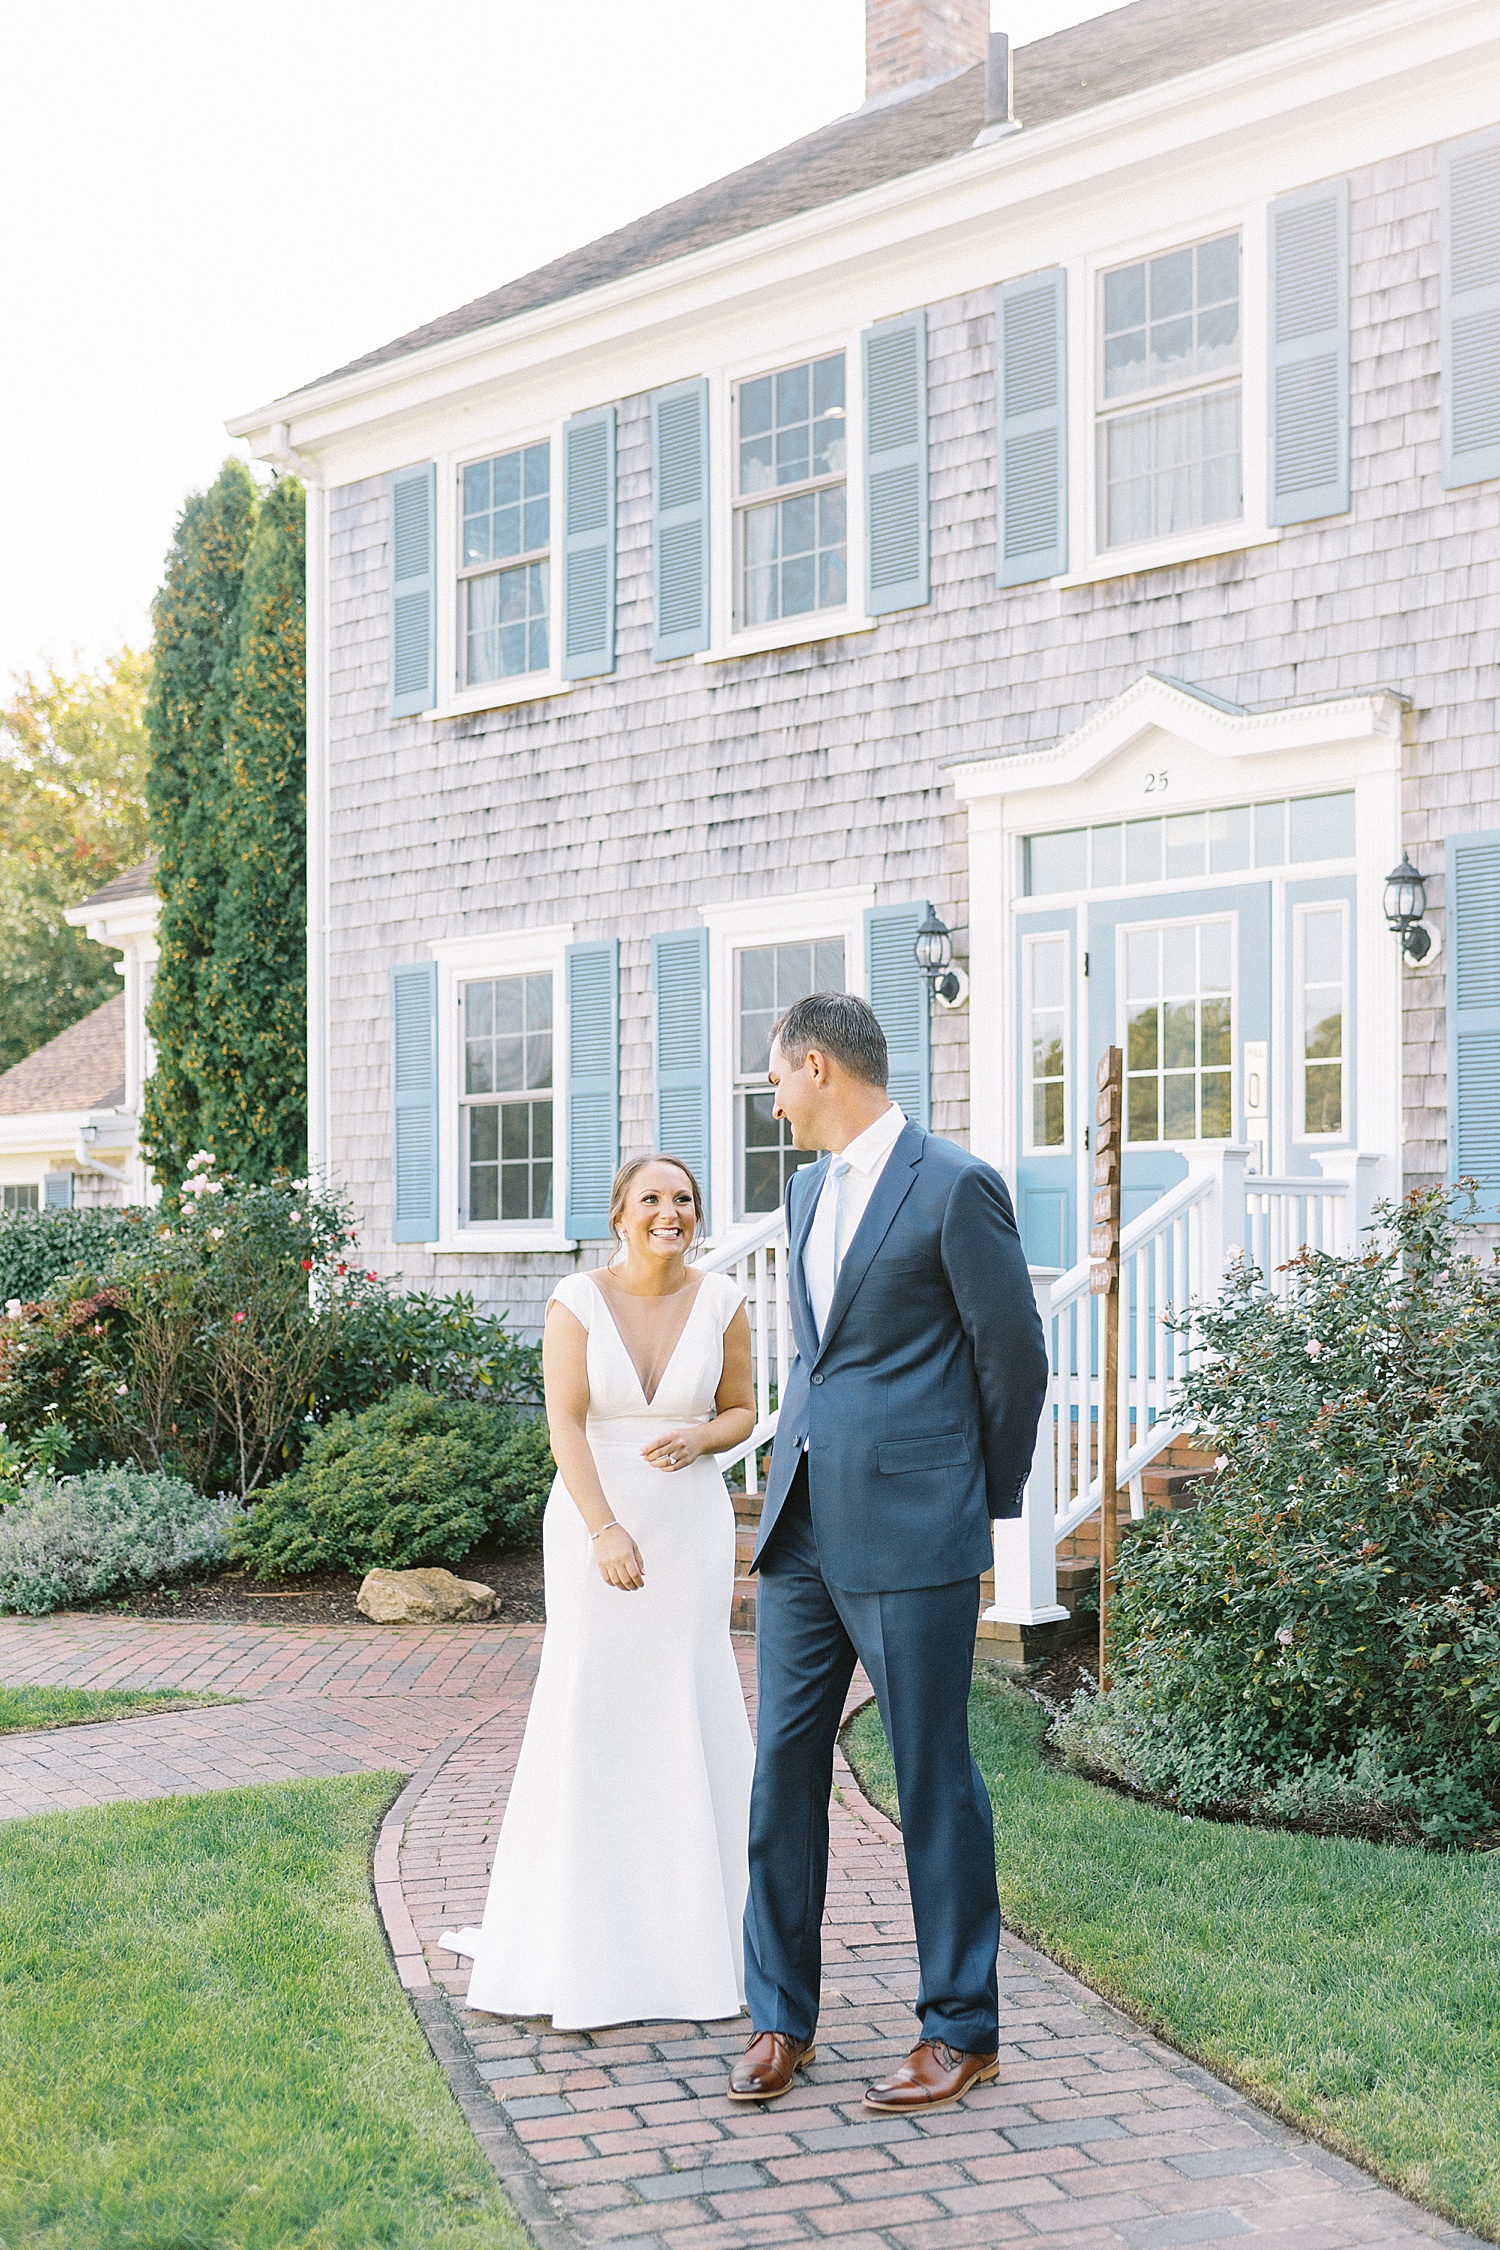 Groom sees bride during first look by Cape Cod wedding photographer Lynne Reznick